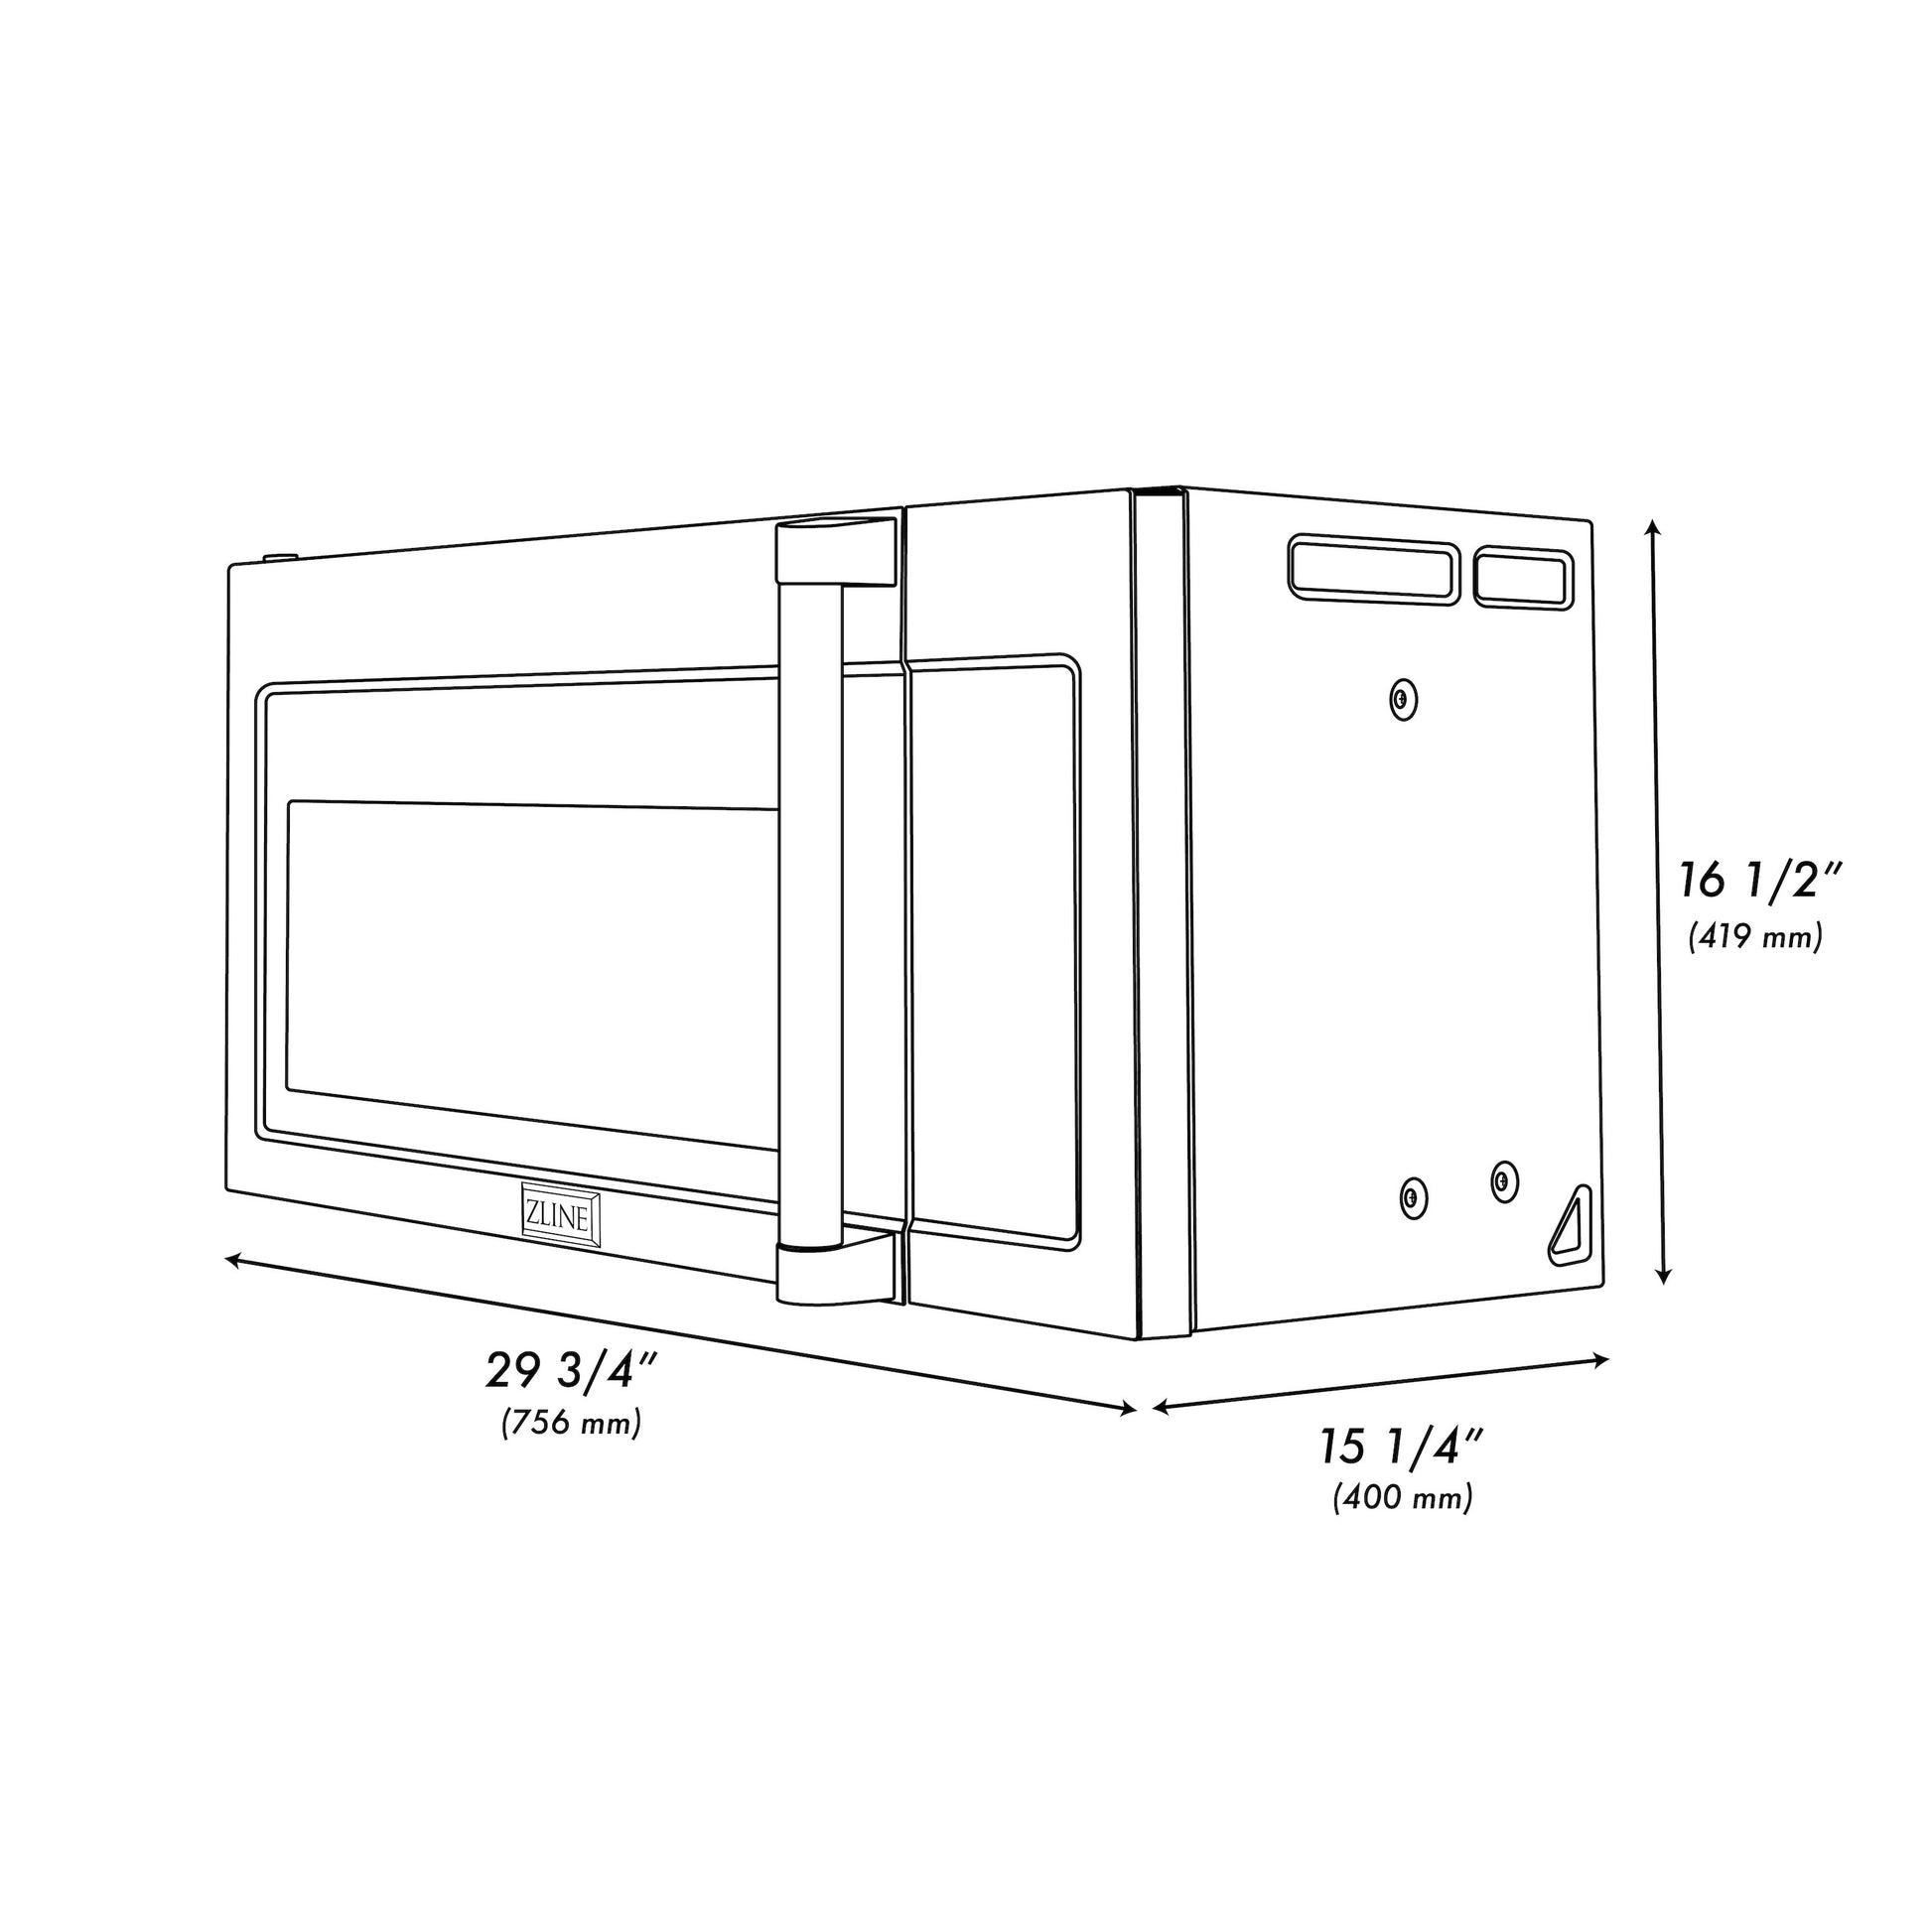 ZLINE 30 in. Over the Range Convection Microwave Oven with Traditional Handle in Fingerprint Resistant Stainless Steel (MWO-OTR-H-SS) dimensional diagram with measurements.